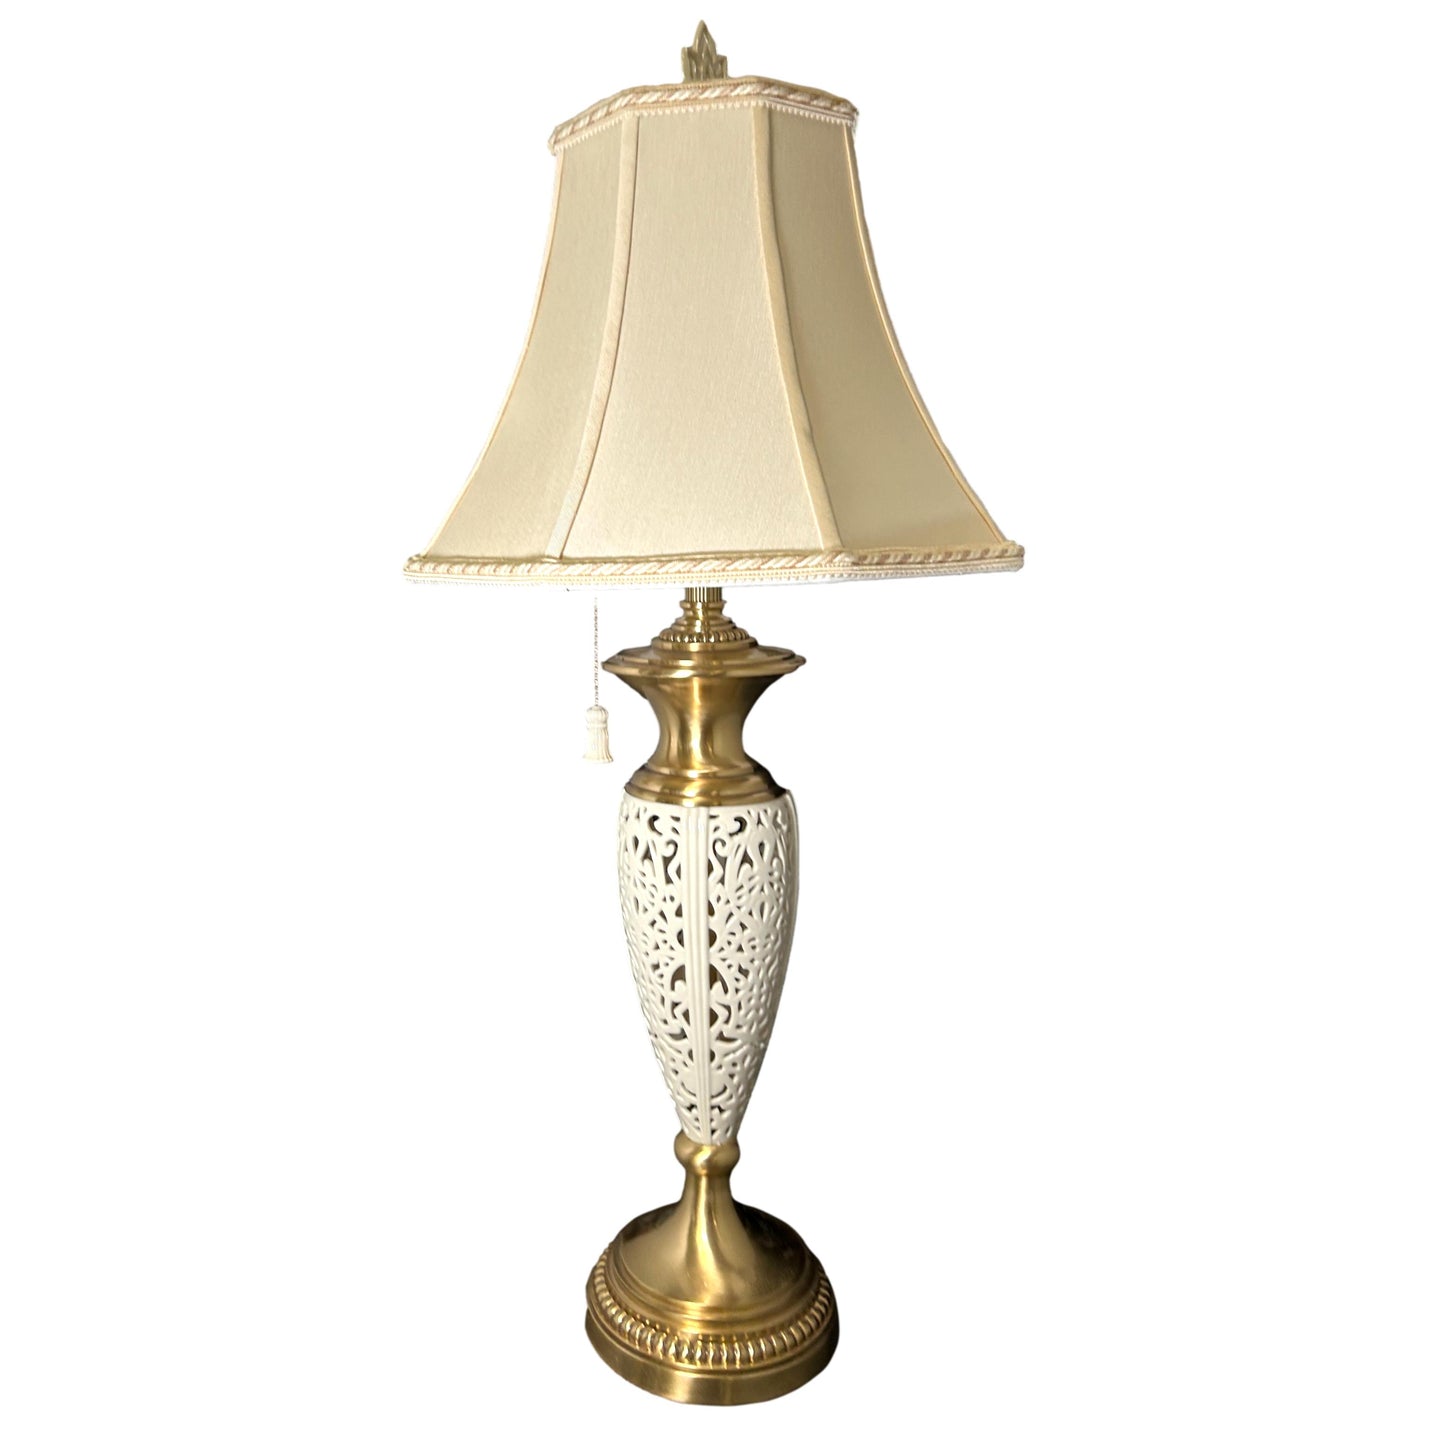 Brass and Porcelain Table Lamp